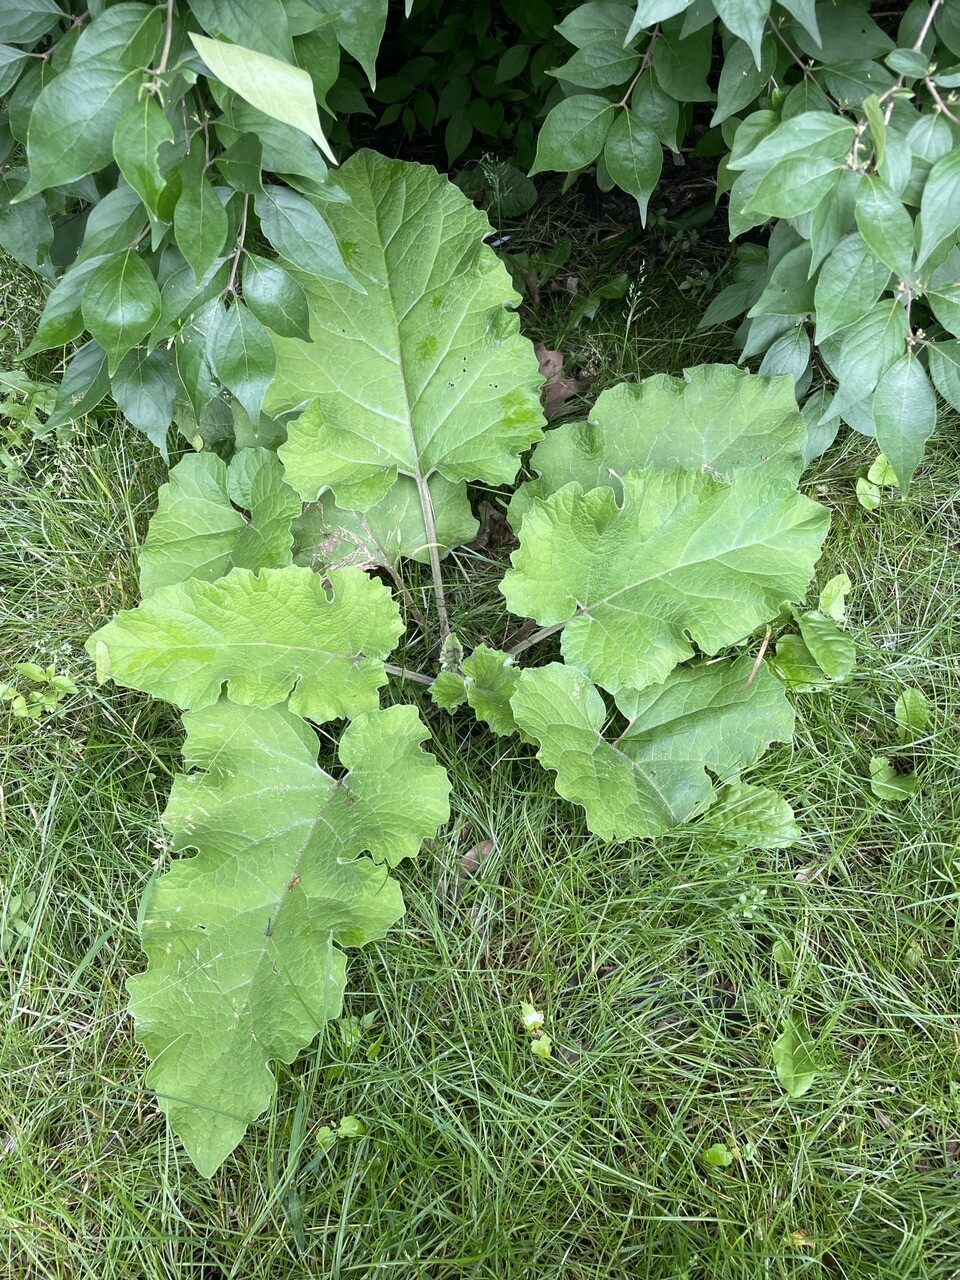 Burdock, broad leaves growing from the ground